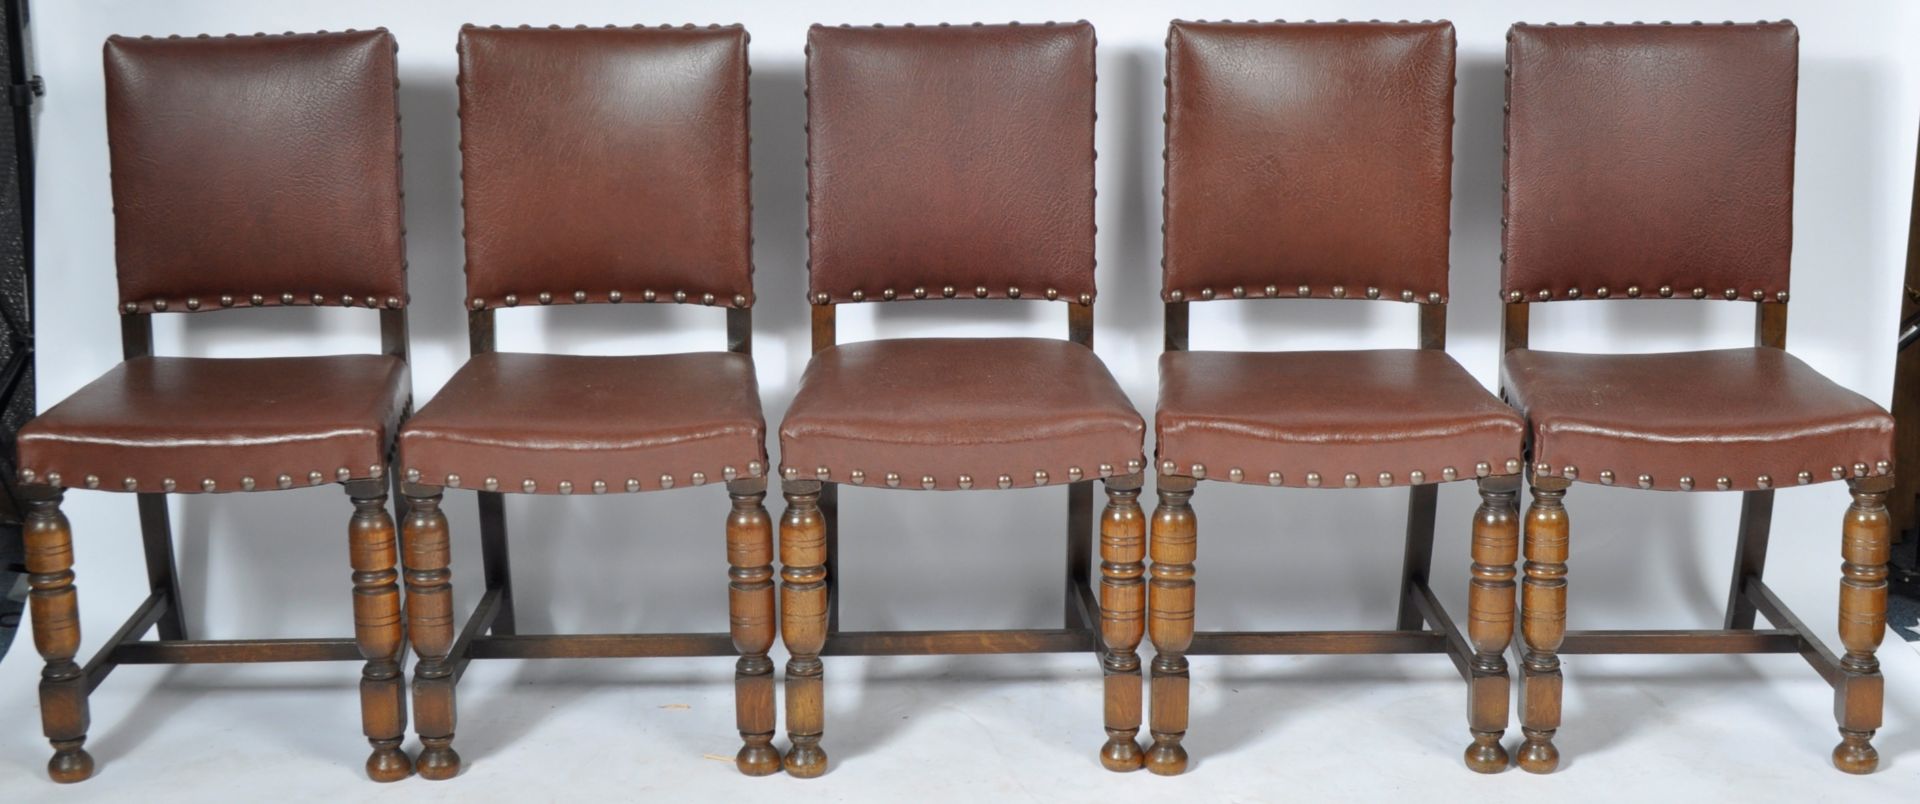 MATCHING SET OF TEN OAK AND LEATHERETTE DINING CHAIRS - Image 2 of 11